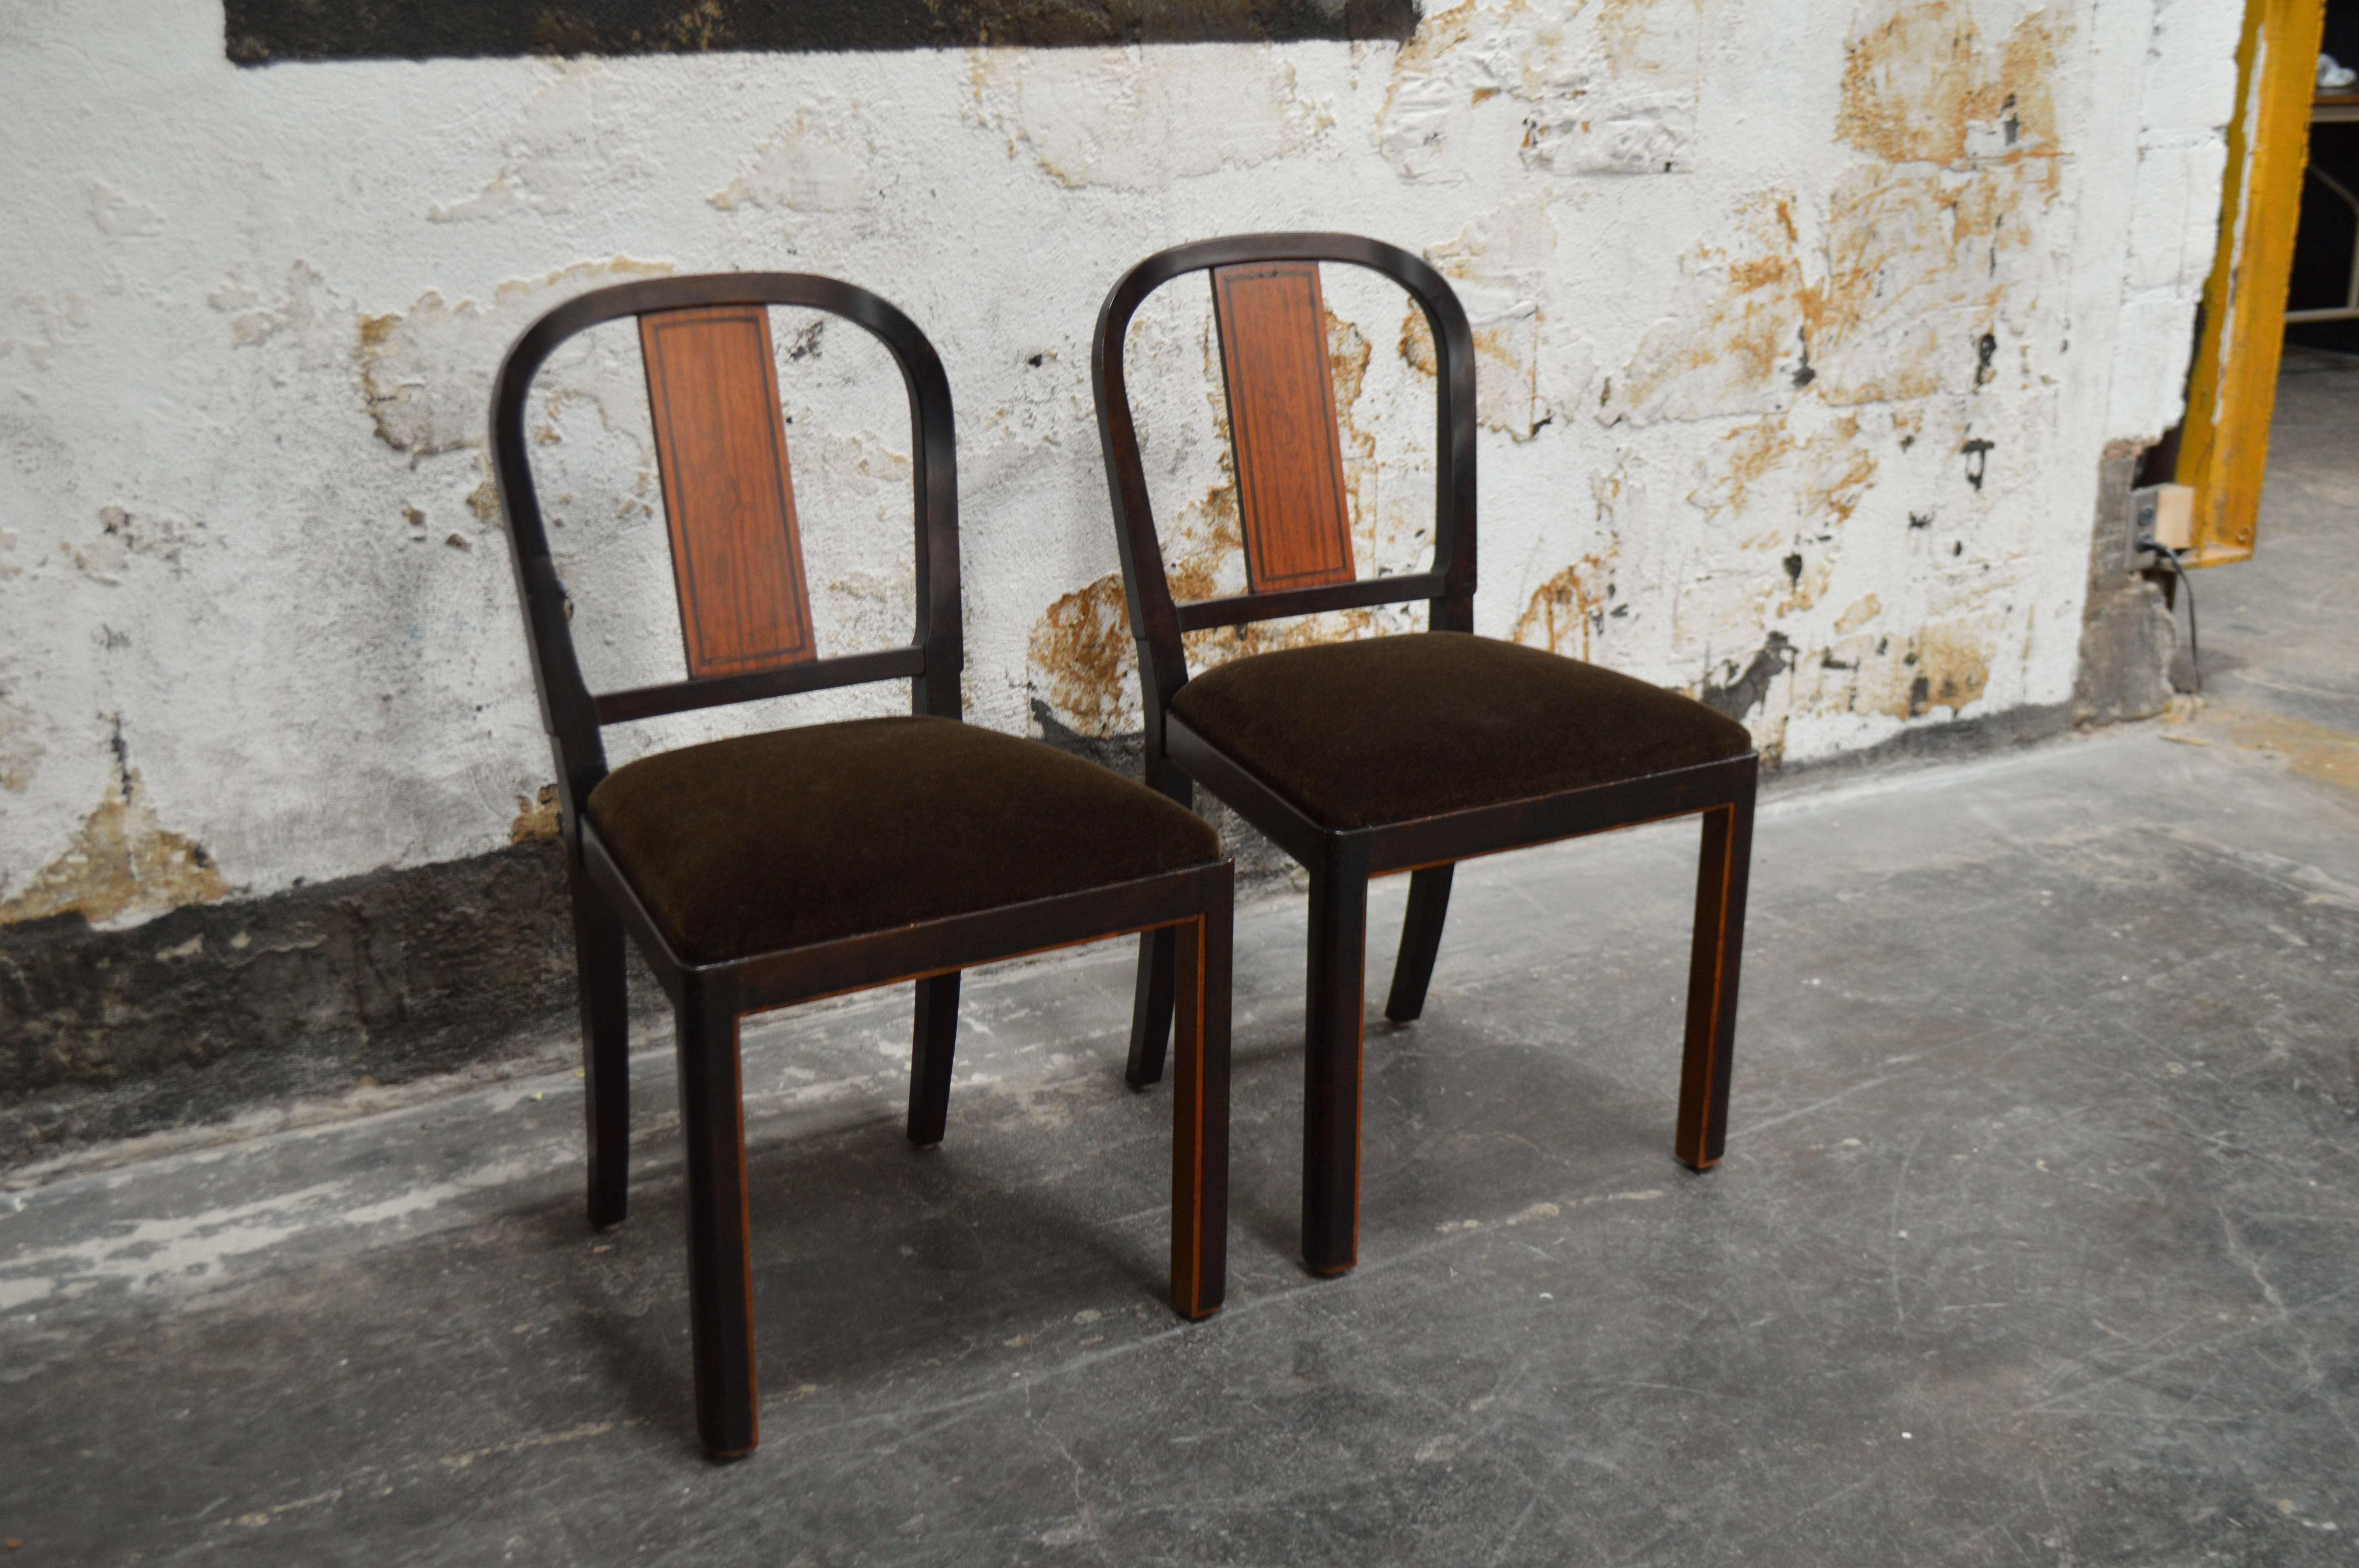 Fantastic pair of Carl Malmsten chairs inlaid rosewood and flame birch. Contrasting wood detail on the inside legs and back. Restored and finished on all sides. New chocolate brown mohair upholstered seats.

Note: These pair nicely with a desk we